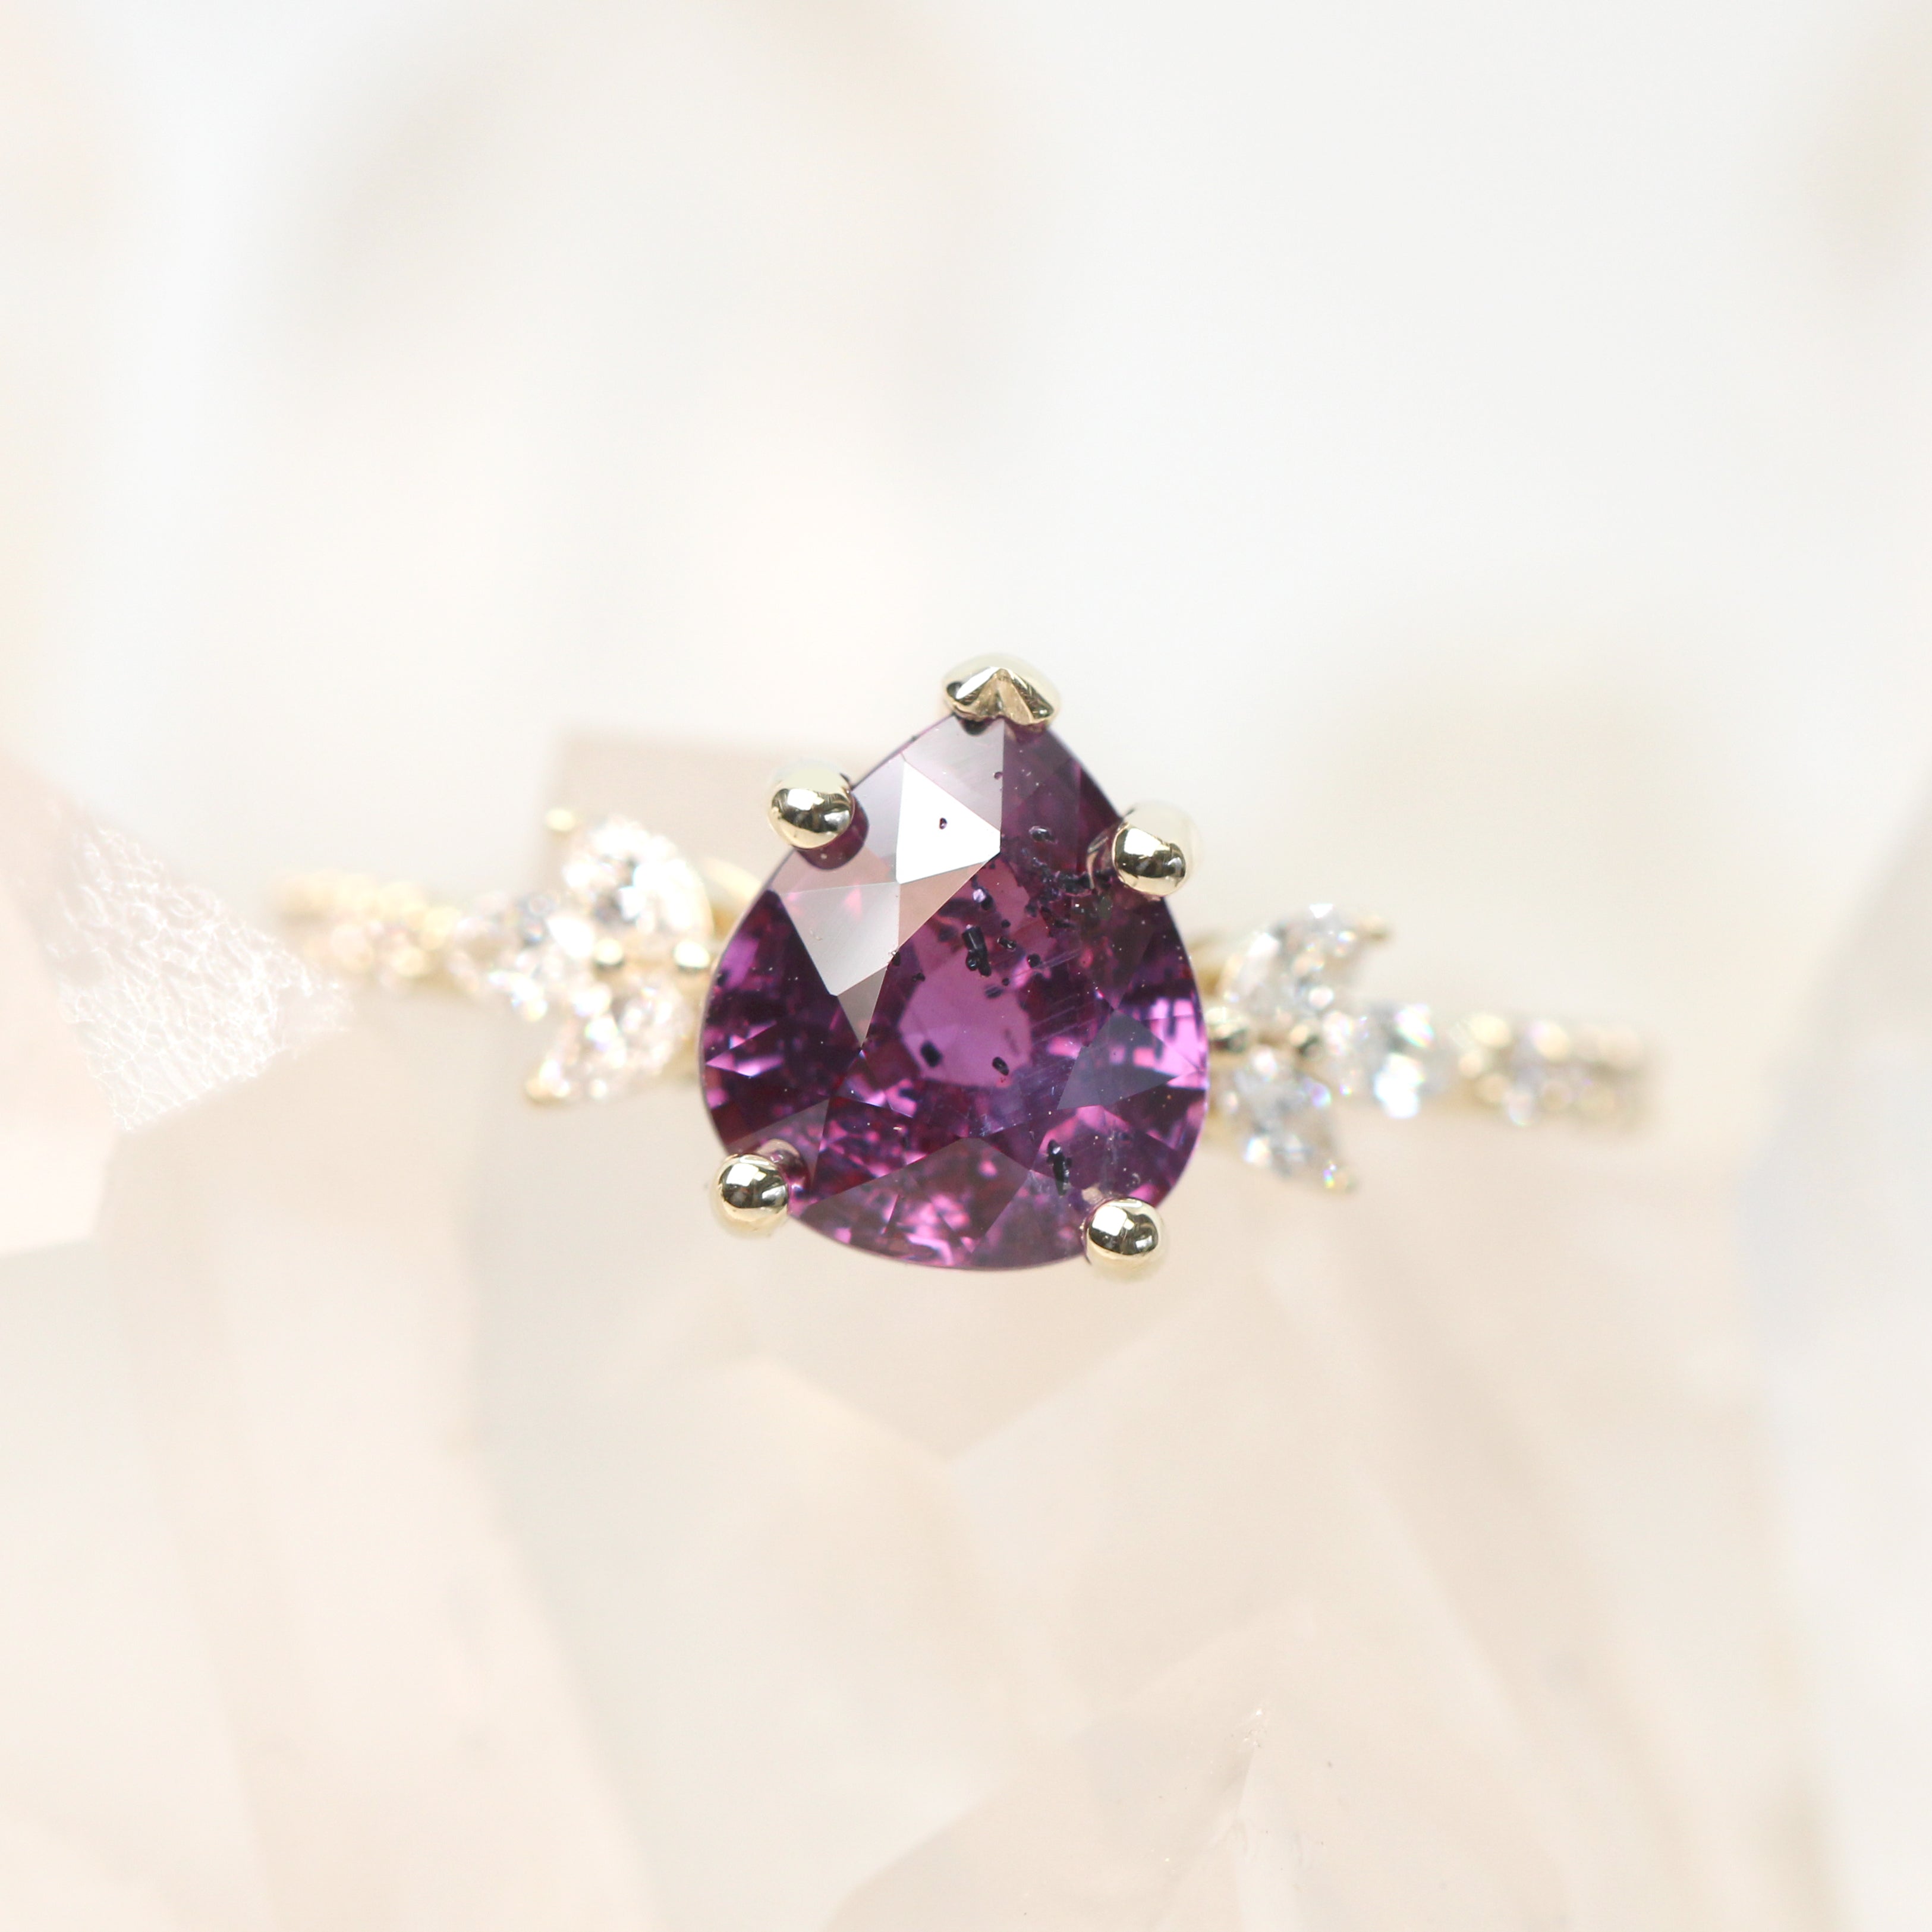 Betty Ring with a 2.55 Carat Pear Magenta Pink Sapphire and White Accent Diamonds - Ready to Size and Ship - Midwinter Co. Alternative Bridal Rings and Modern Fine Jewelry